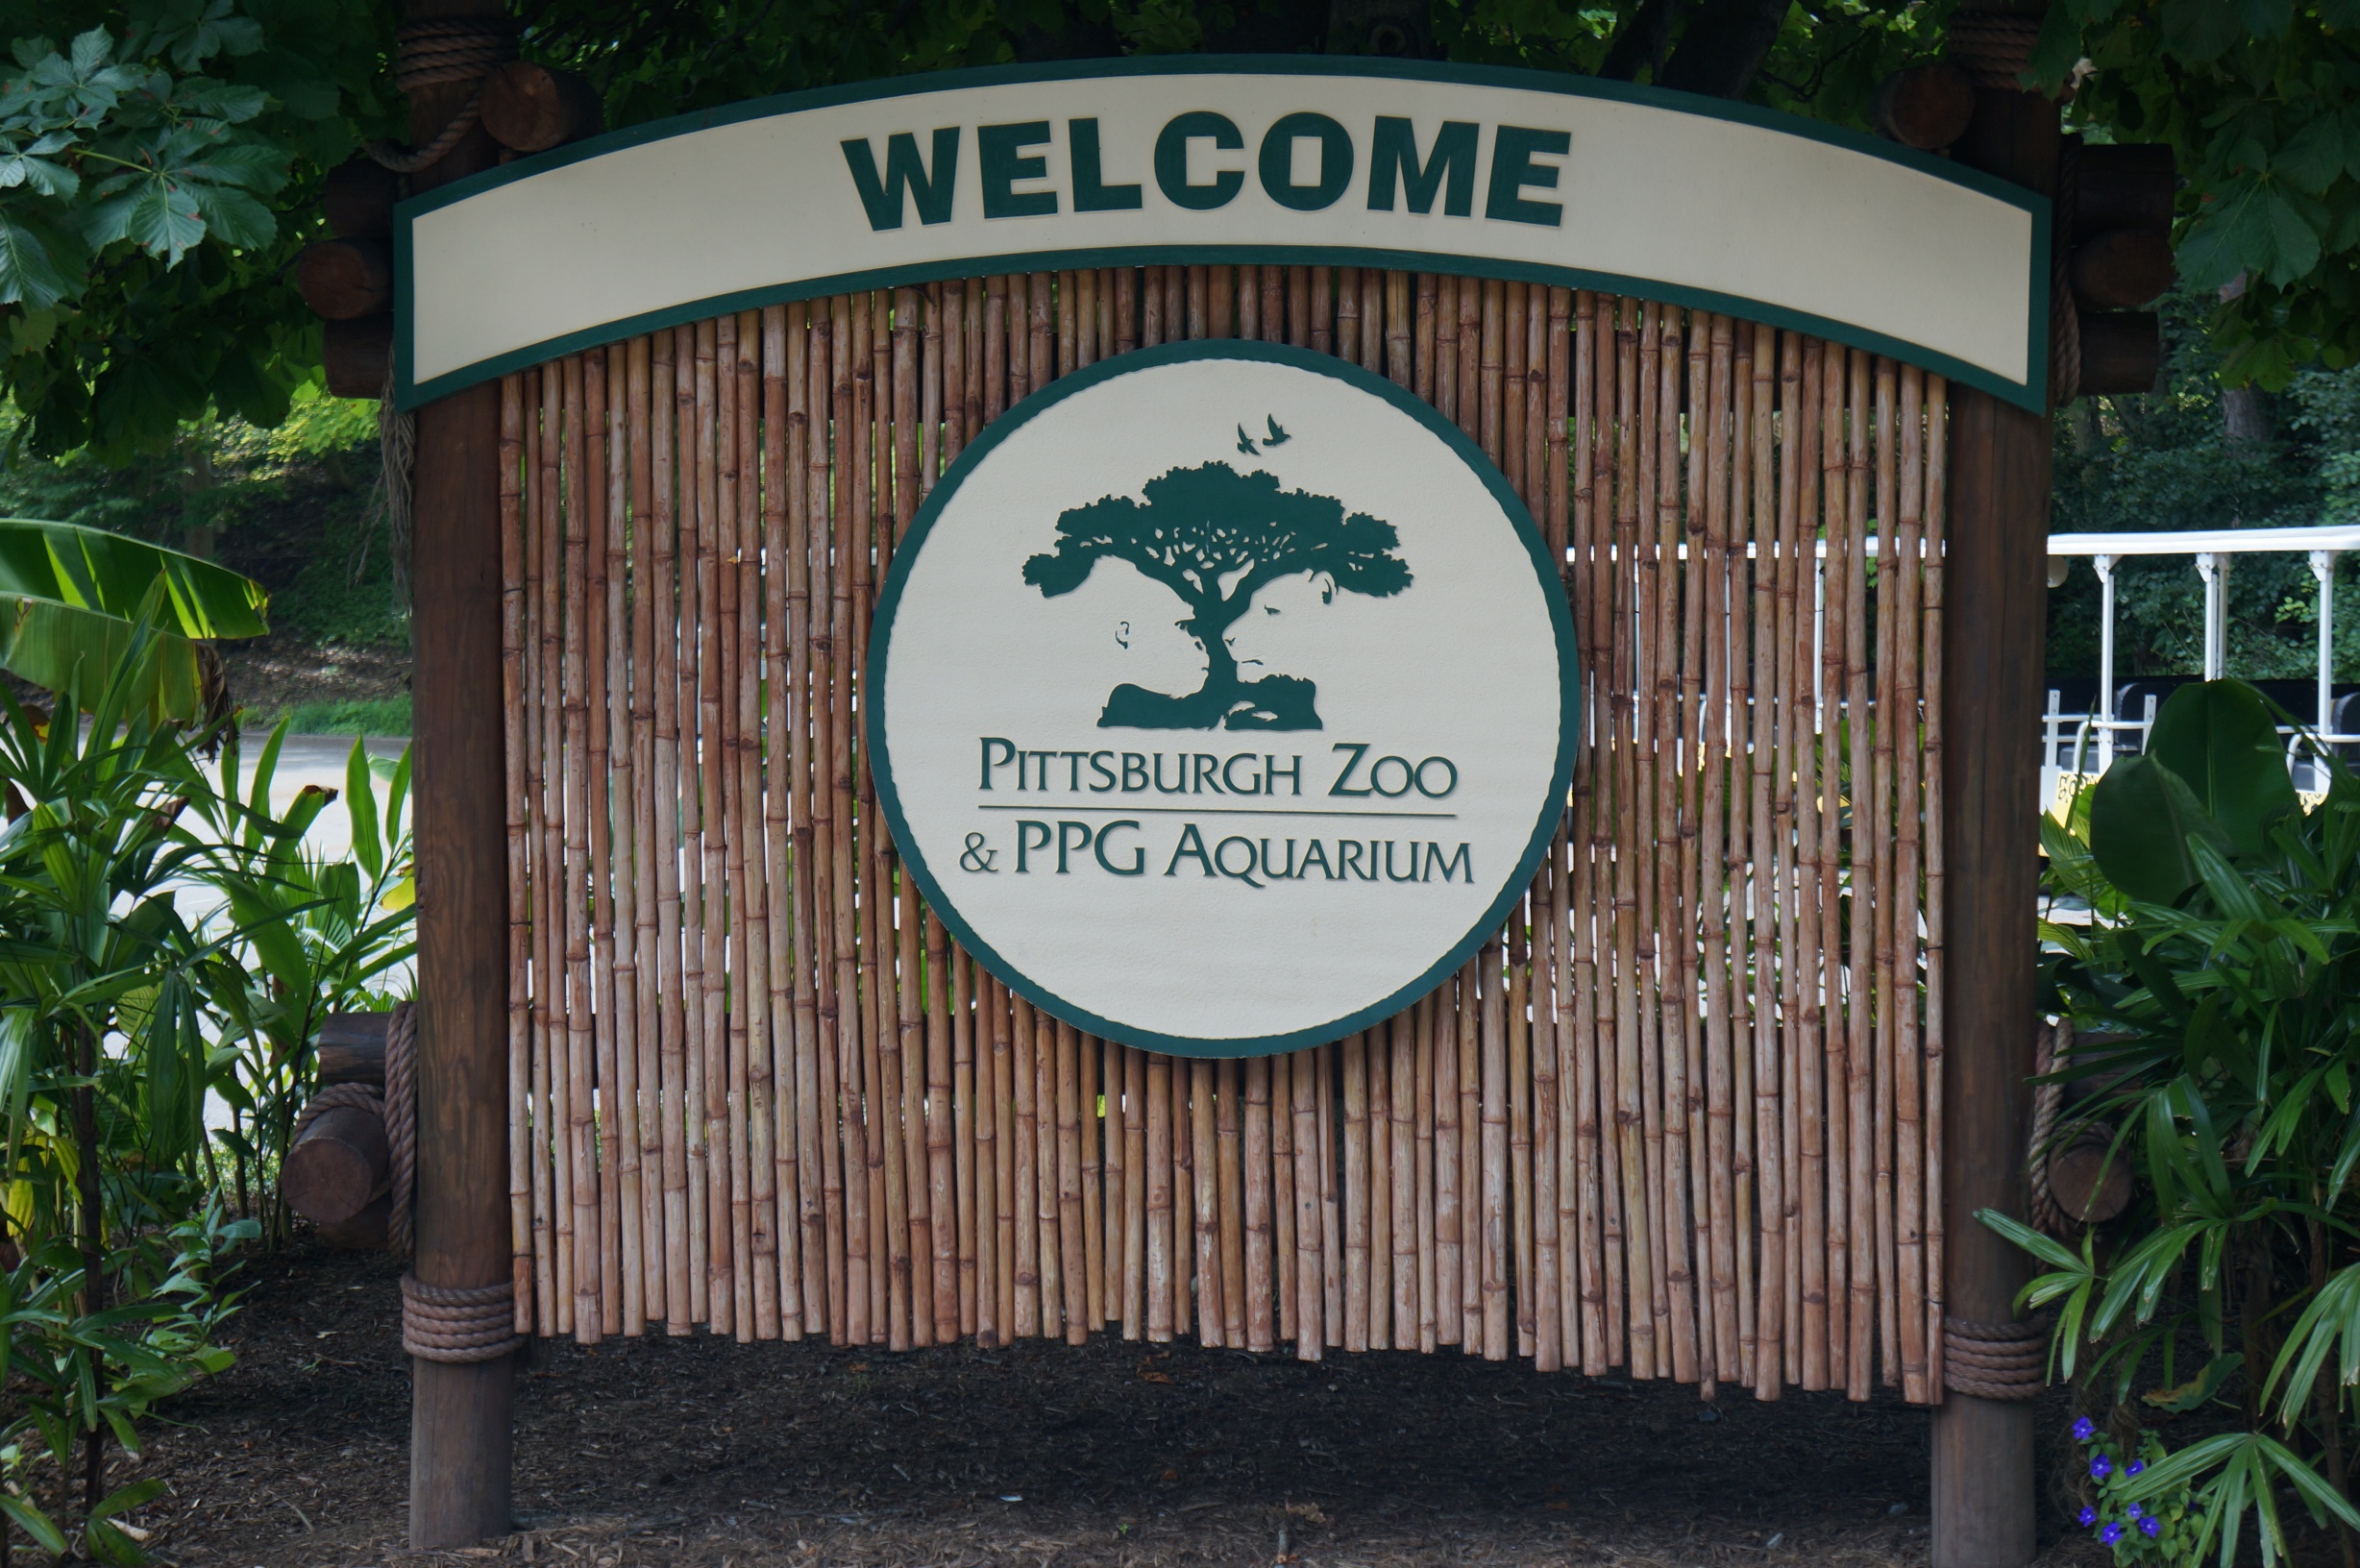 A Day at The Pittsburgh Zoo & PPG Aquarium